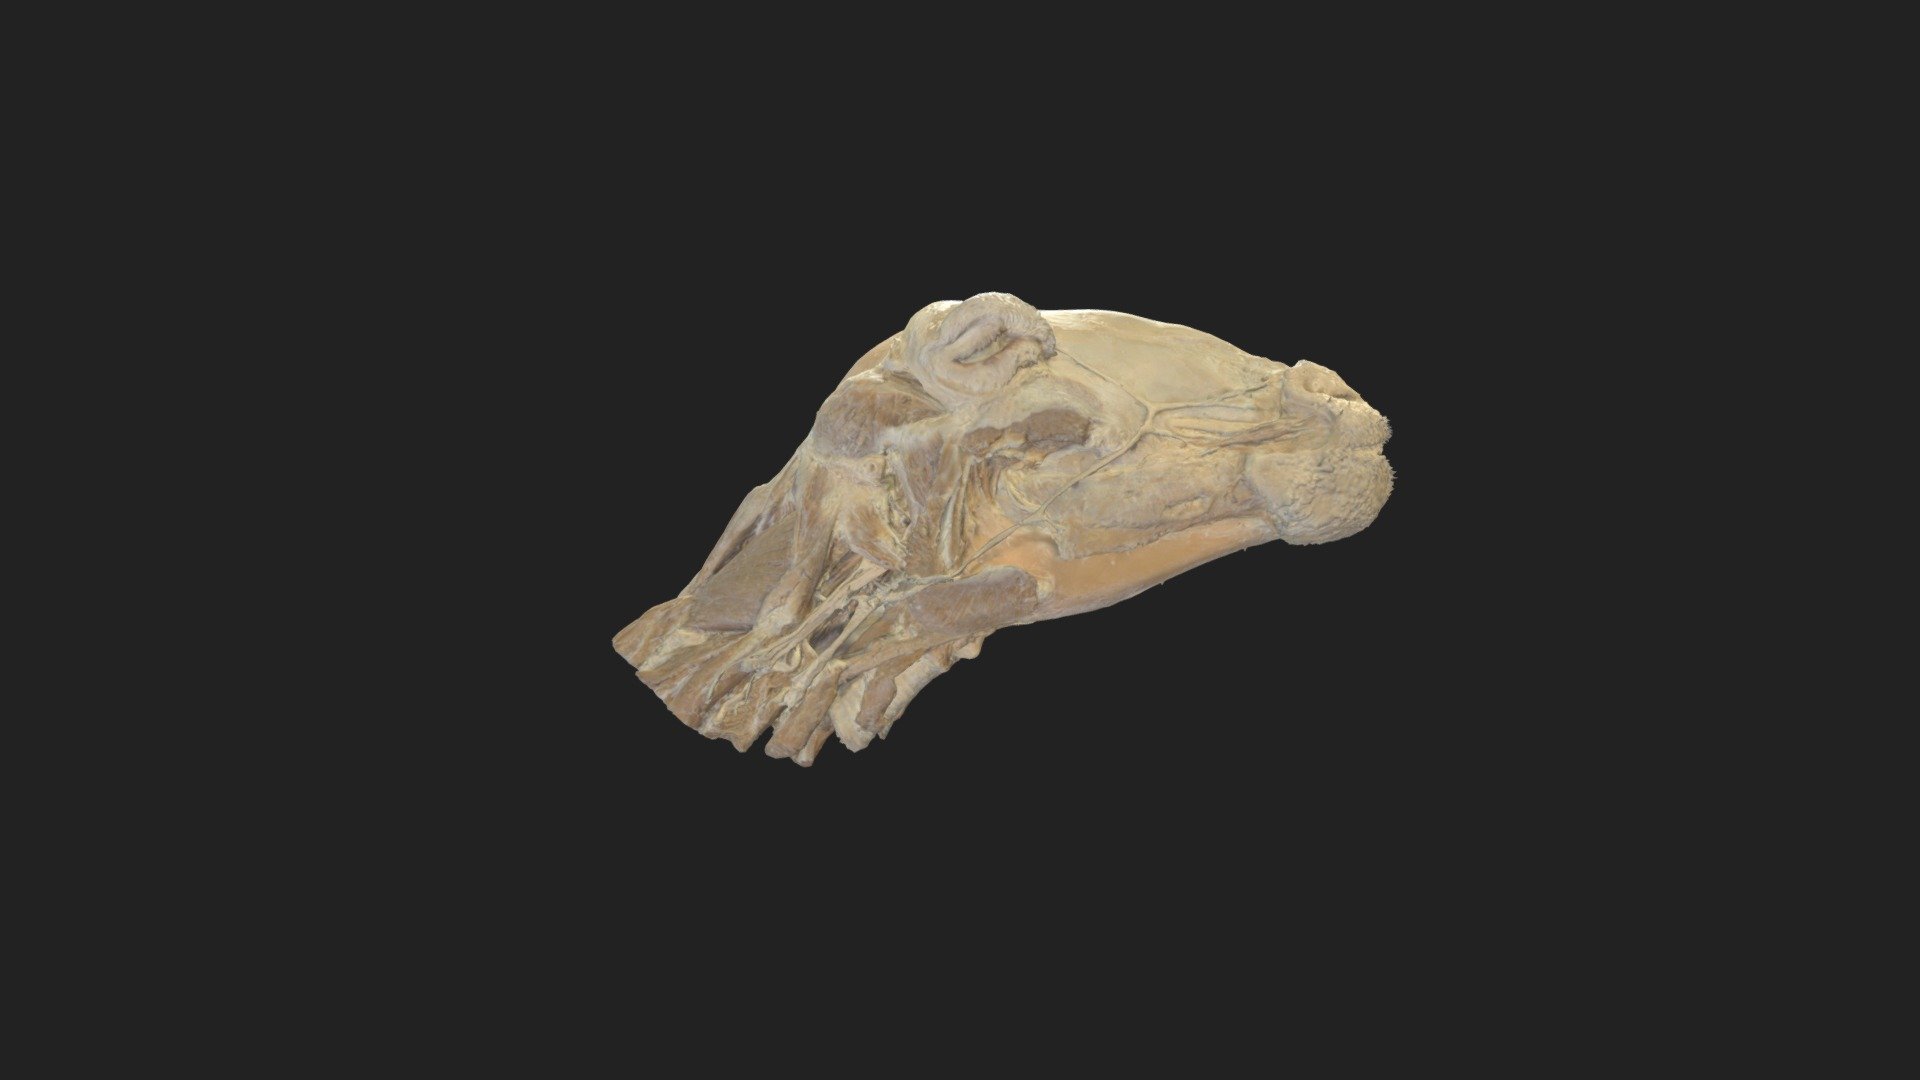 headmuscels and cutout of masticatory muscels of a sheep 

size of specimen: 365.2 x 123.8 x 221.9 mm 

3D scanning performed with the structured light scanner “Artec Space Spider” - headmuscels sheep - 3D model by vetanatMunich 3d model